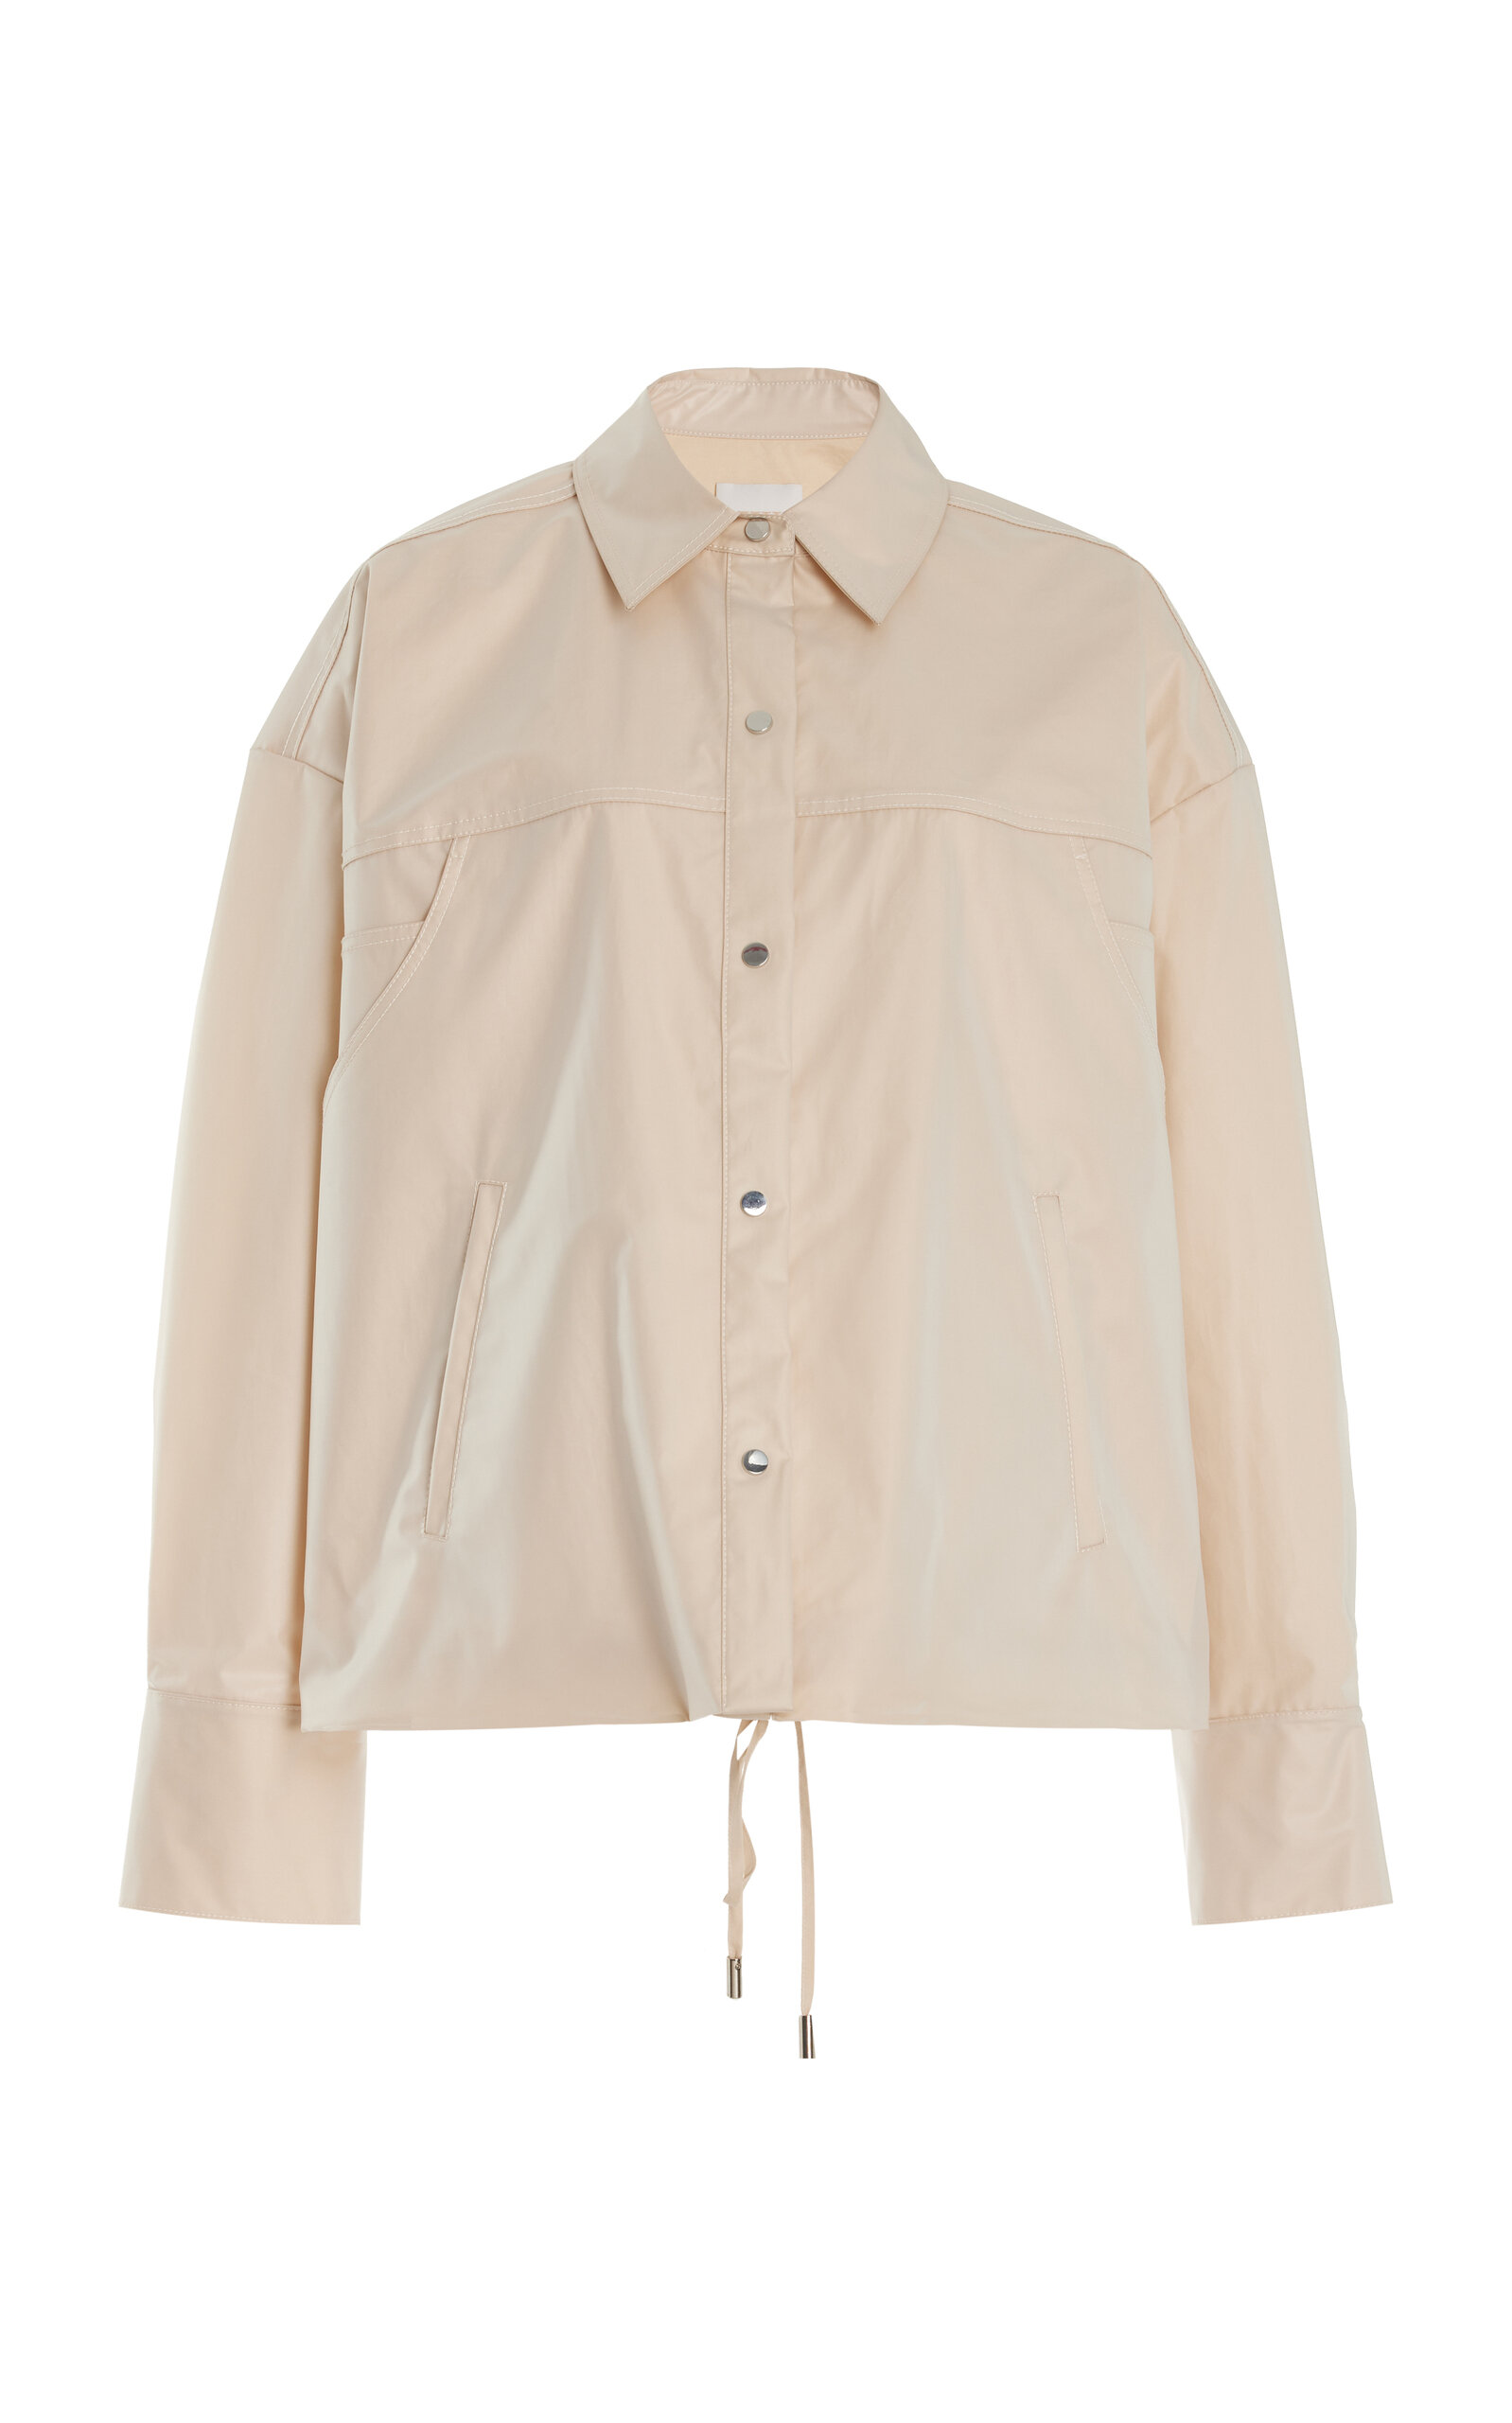 Twp A Rainy Day Water-resistant Bomber Jacket In Nude